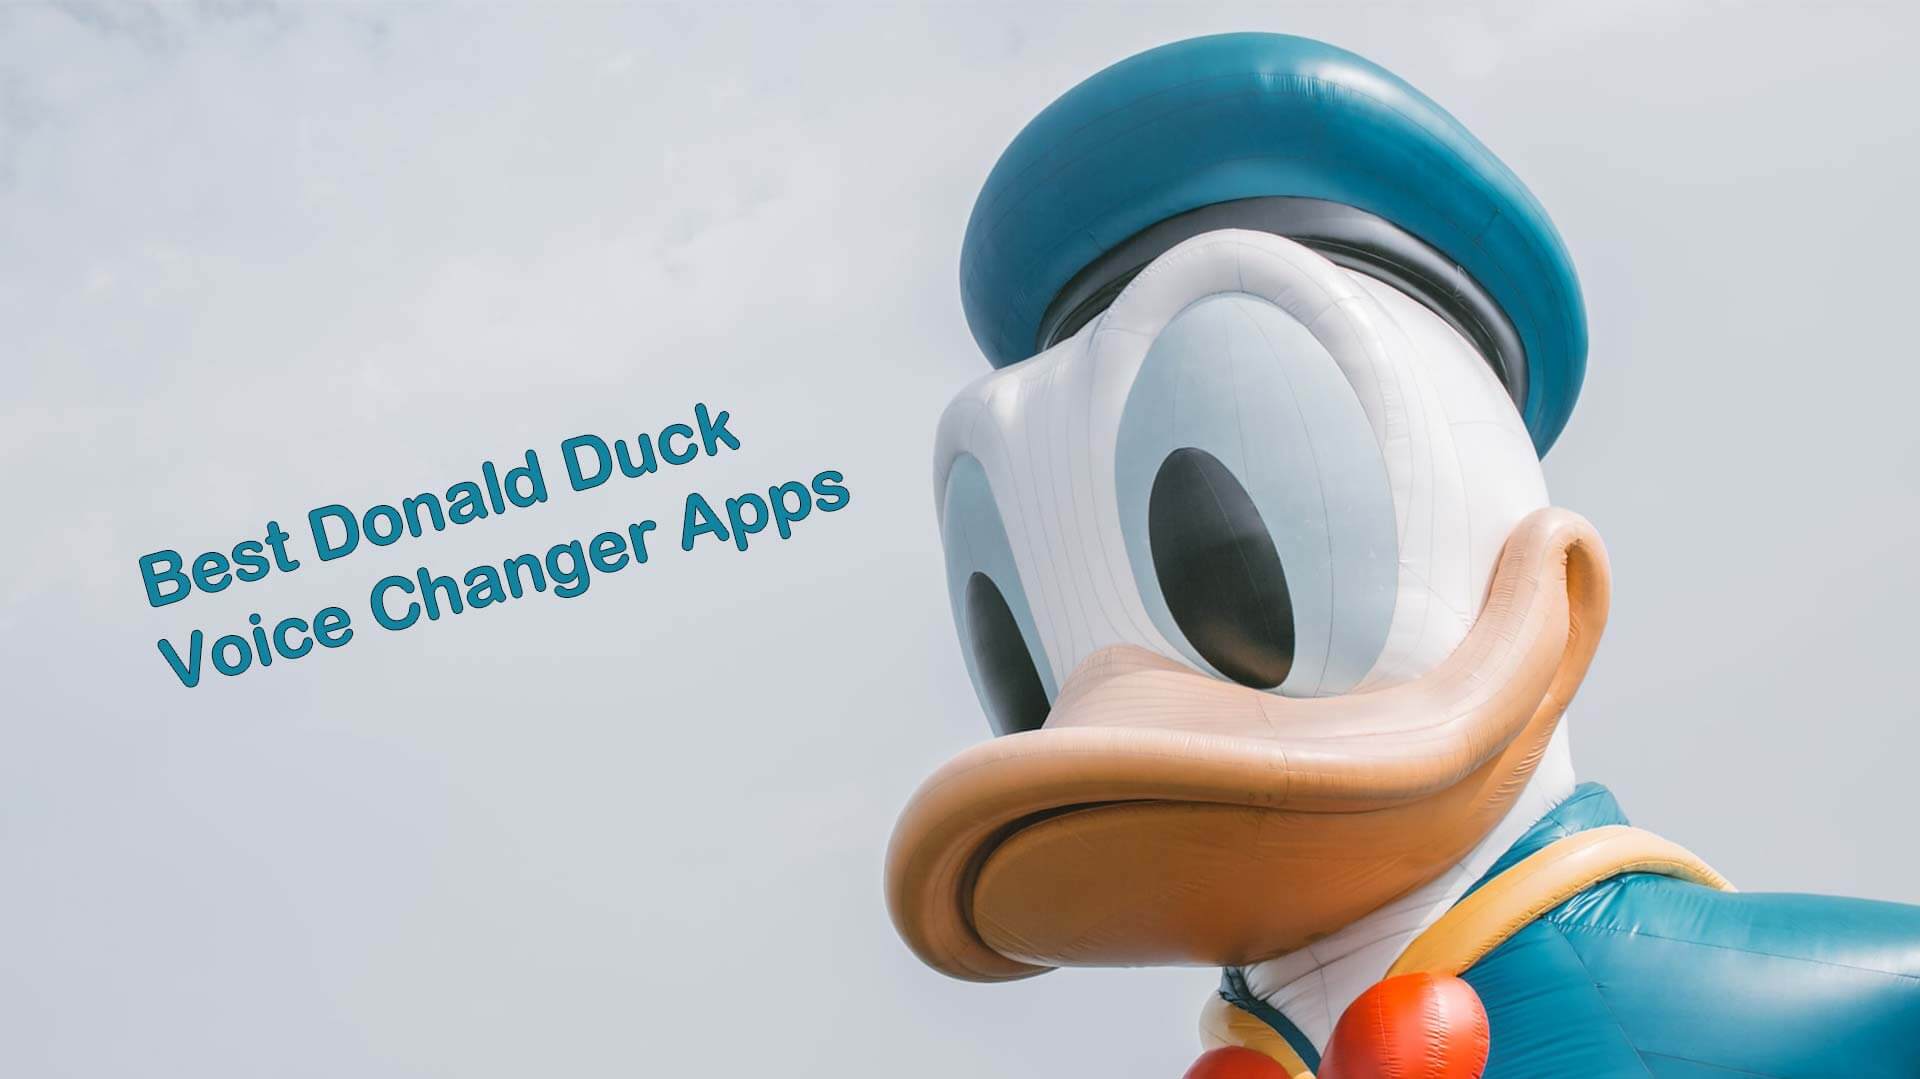 Relive the Disney Days with Donald Duck Voice Changer Apps